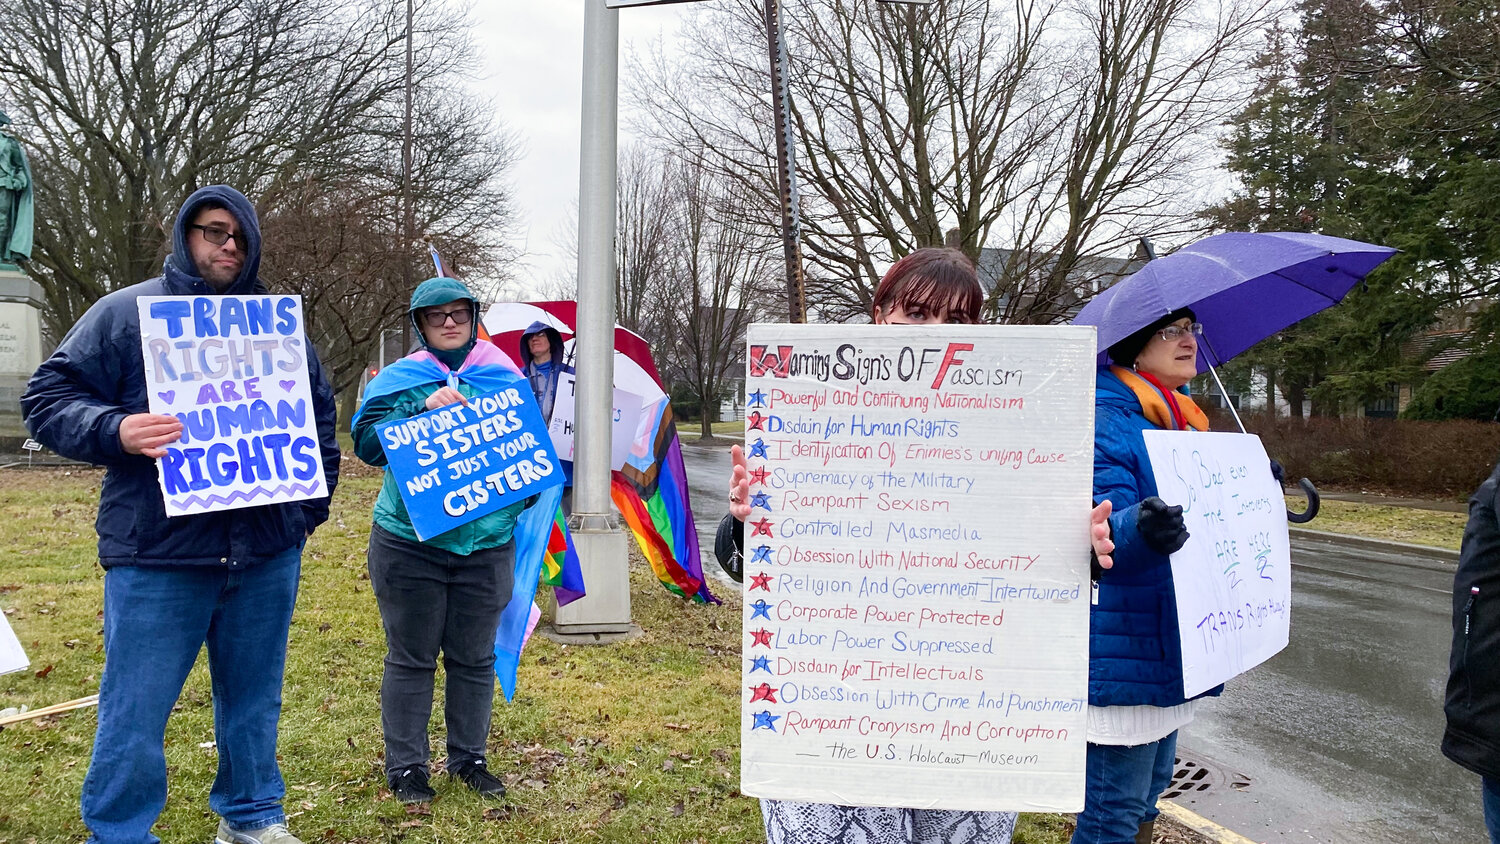 Participants in the International Transgender Day of Visibility rally display signs of support for the rights of transgender people on Friday, March 31.